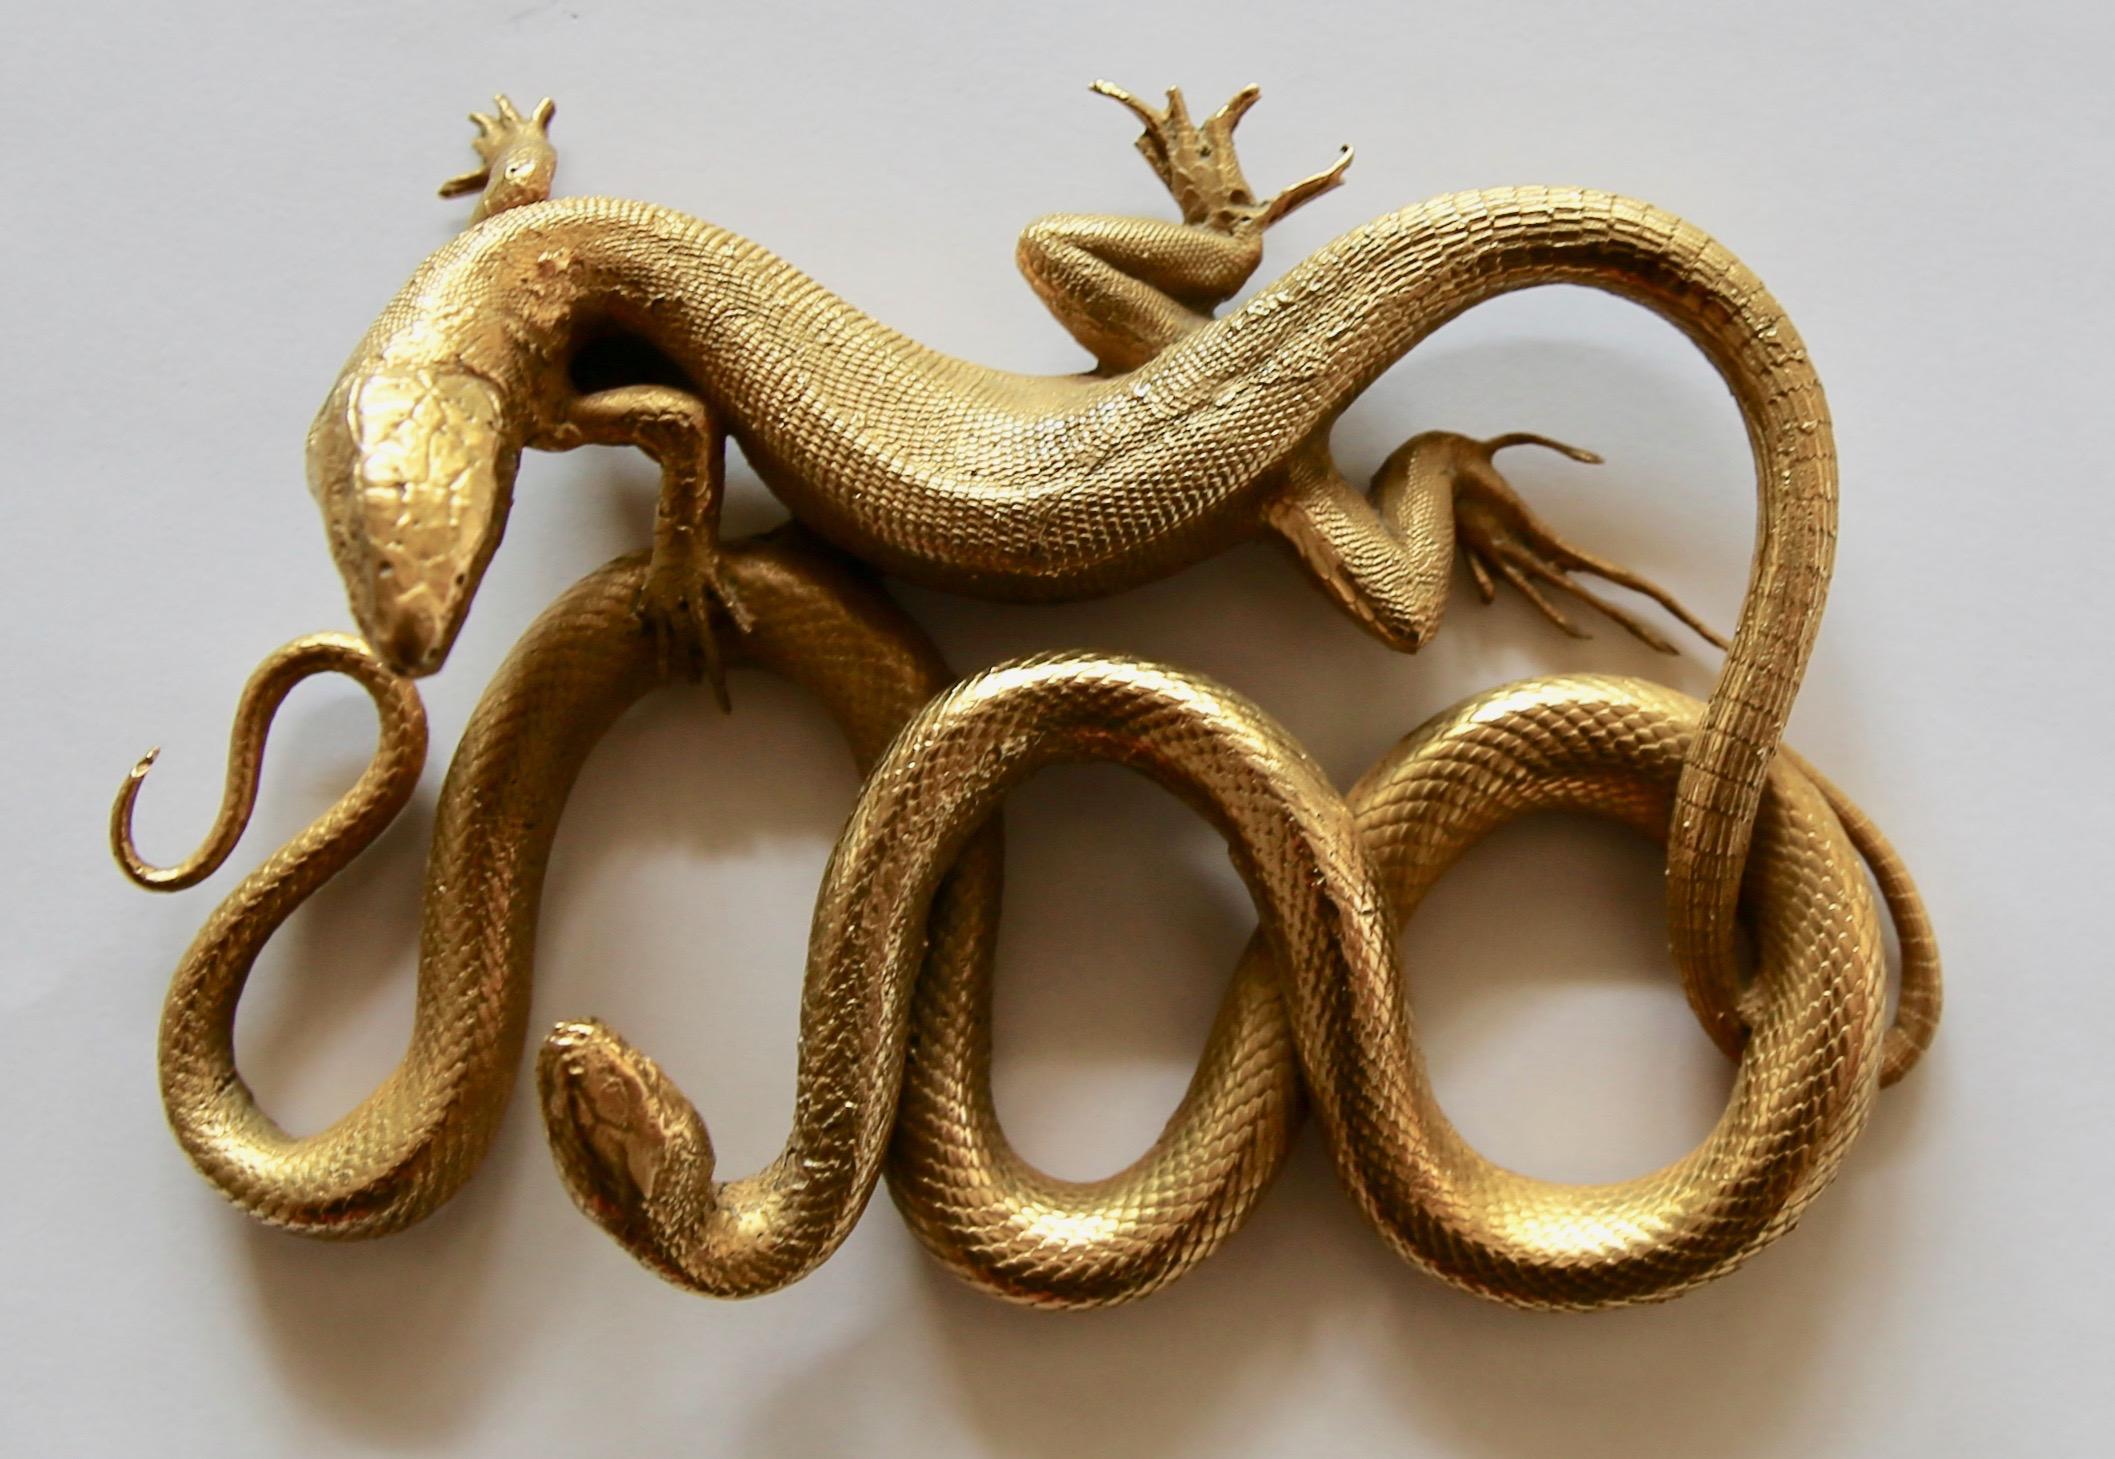 Rare snake and lizard gilt bronze piece, France 19th century, Empire period.
Beautiful quality of bronze. Measures: 5.5 in wide.

 